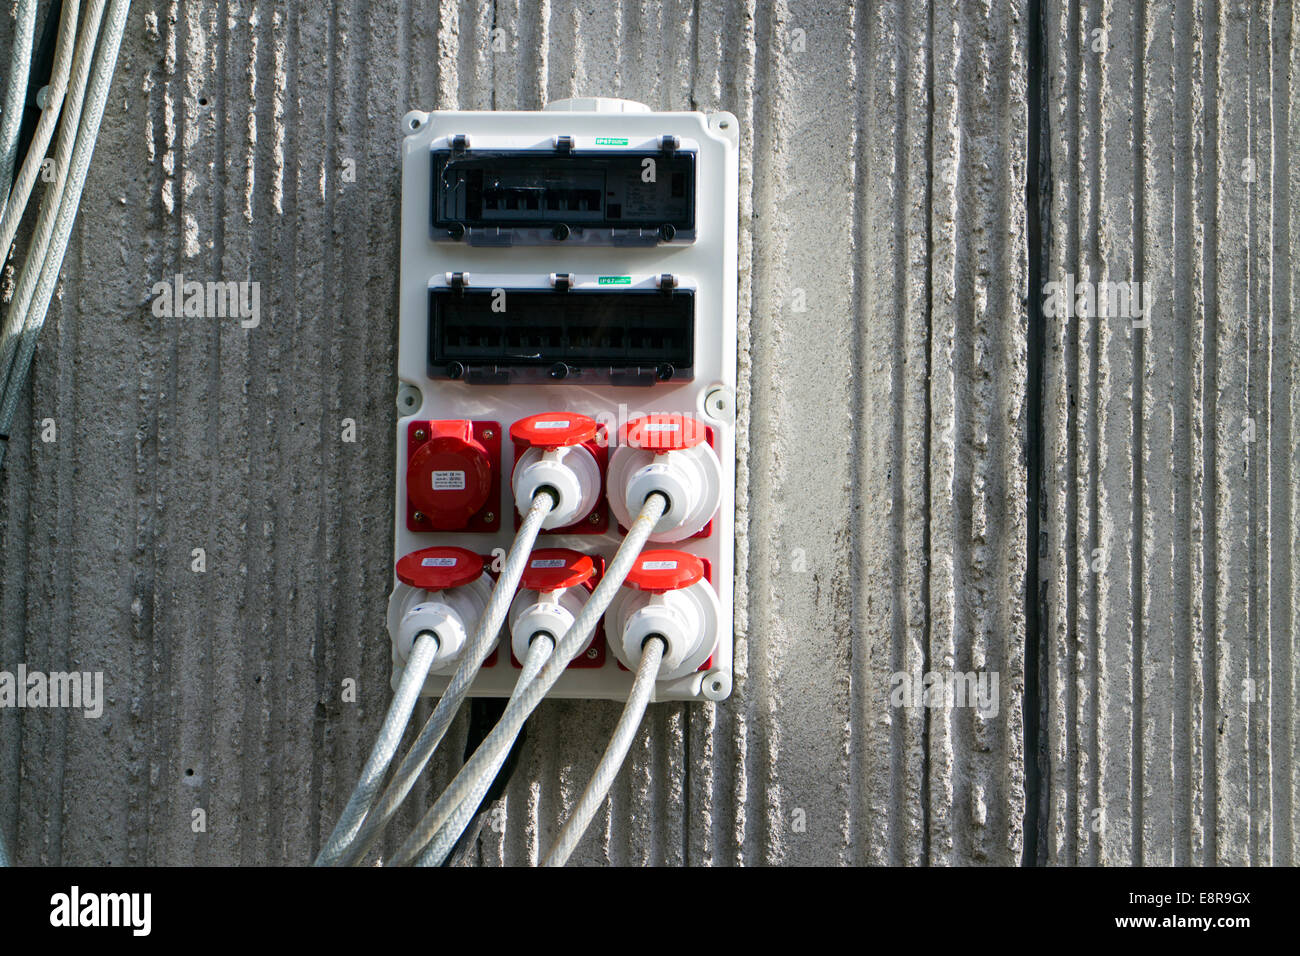 Industrial power supply Stock Photo